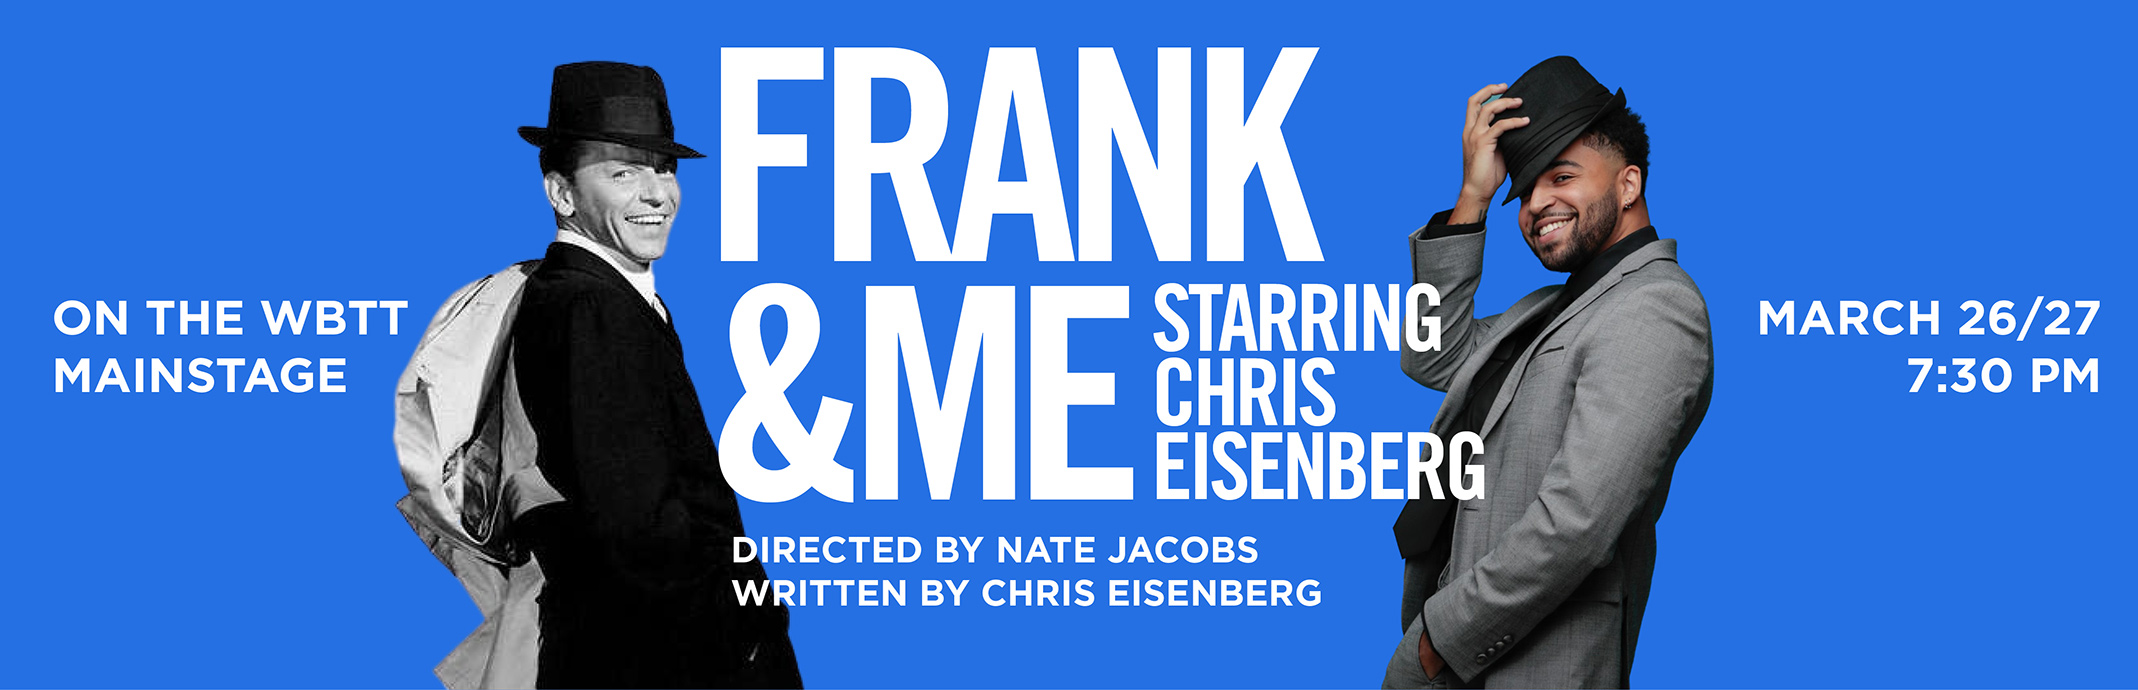 Frank and Me Starring Chris Eisenberg: March 26/27 at 7:30pm